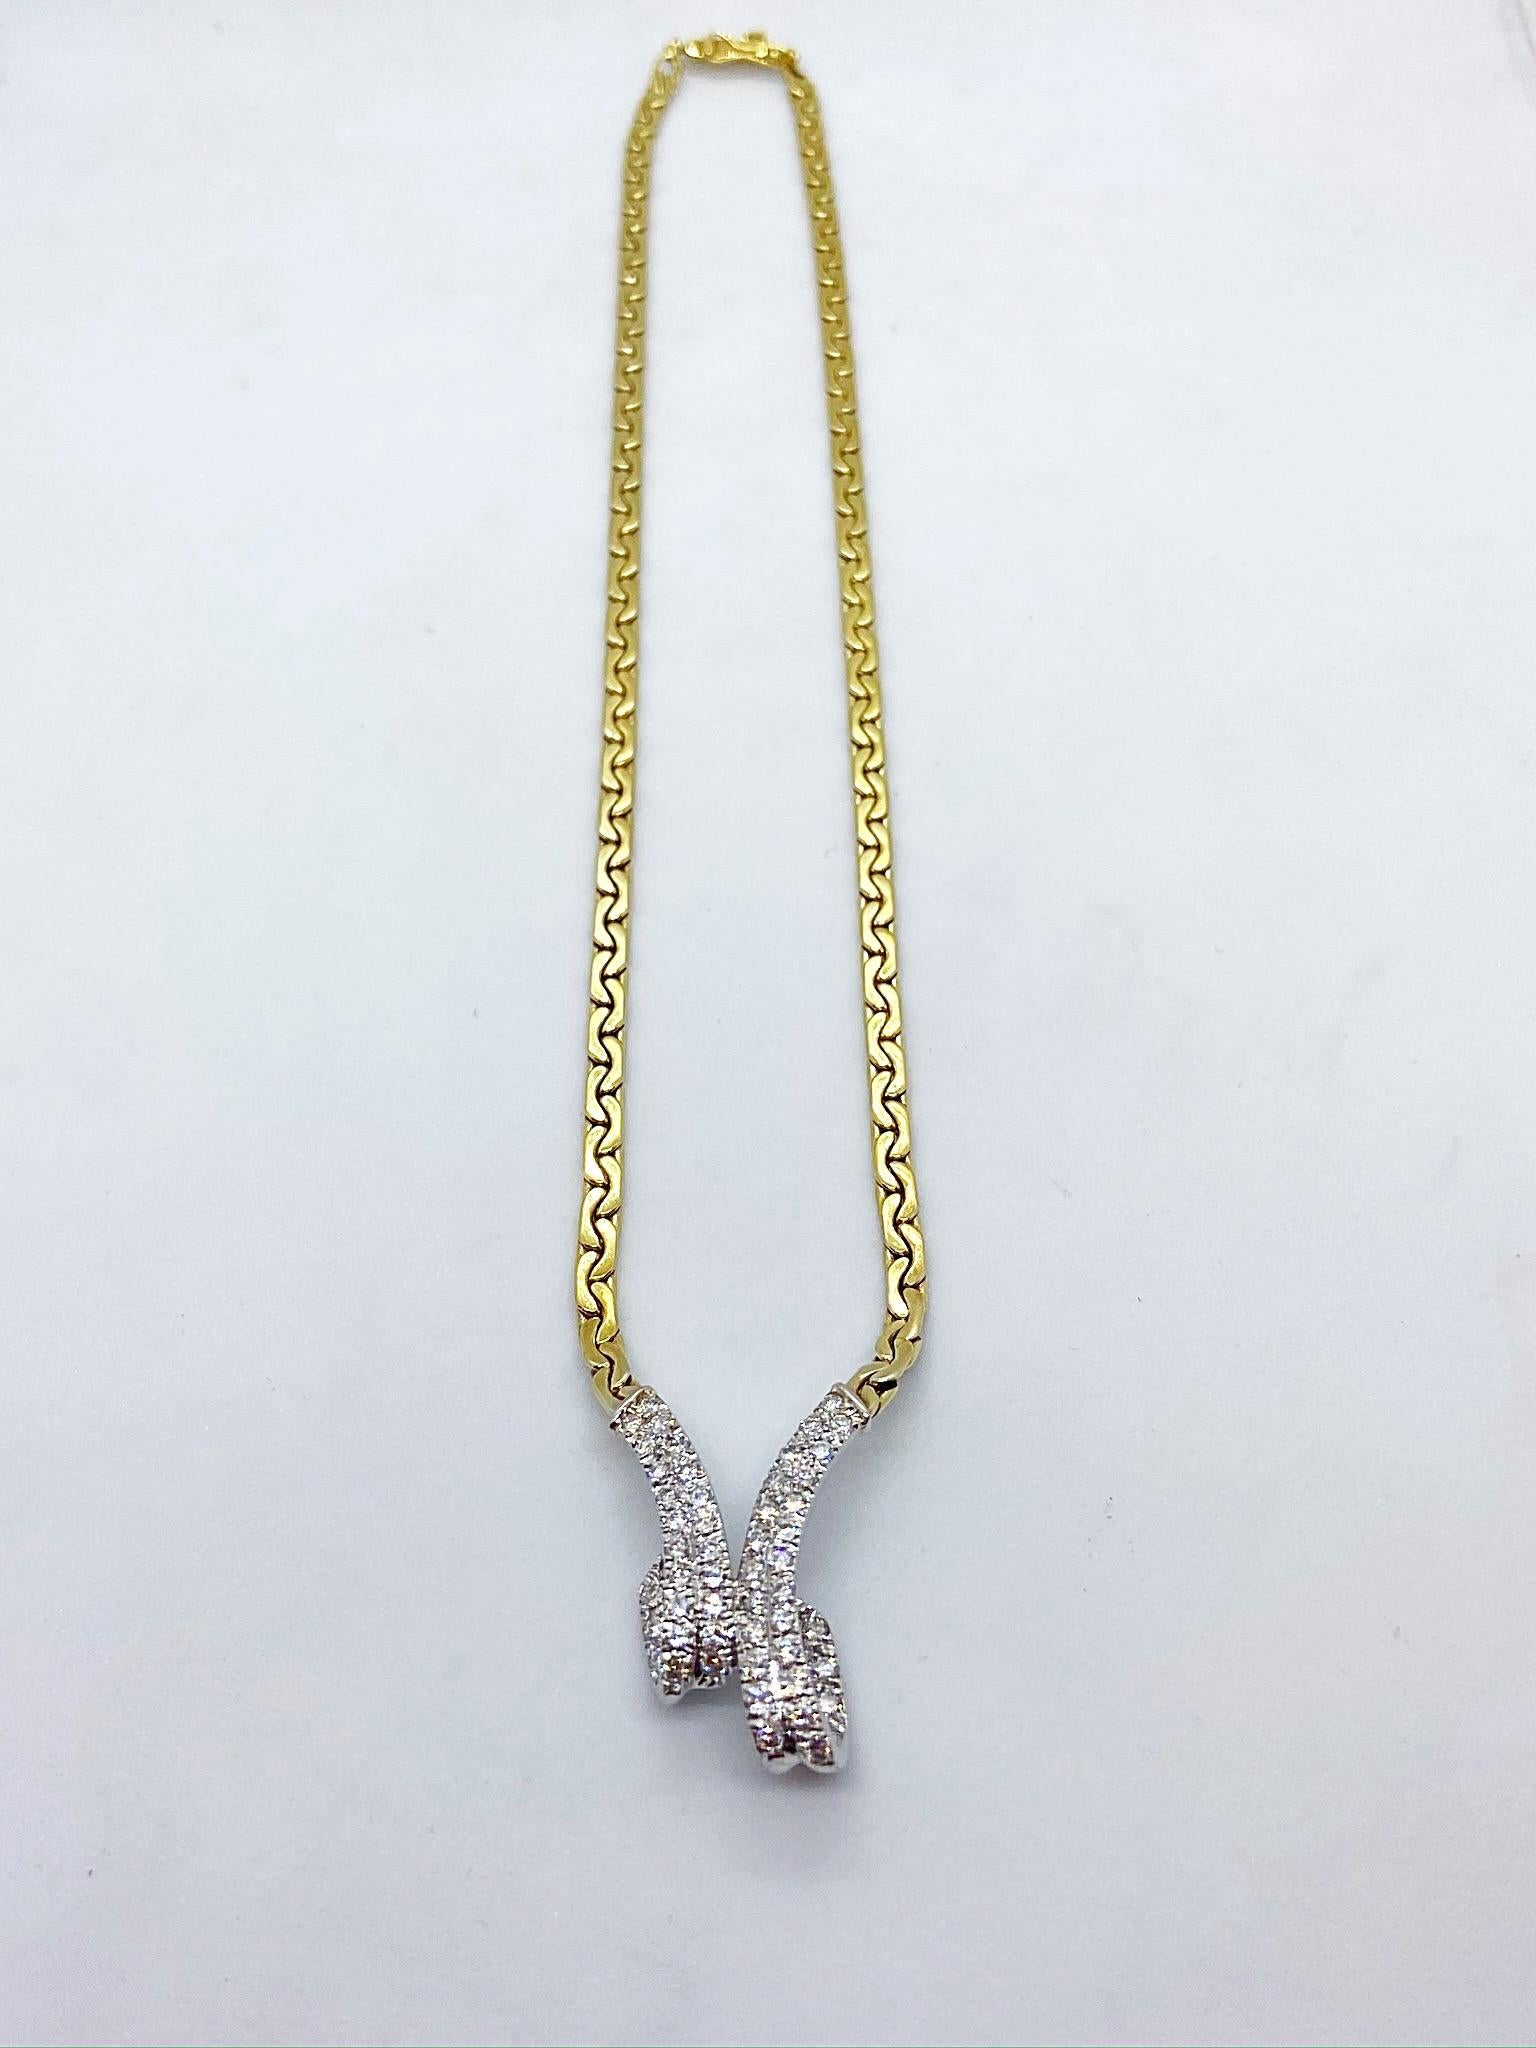 This 14 karat gold necklace is designed with a white gold center ribbon like section set with round Brilliant Diamonds. The yellow gold chain is a flat c link. The total length of the necklace measures 15.5